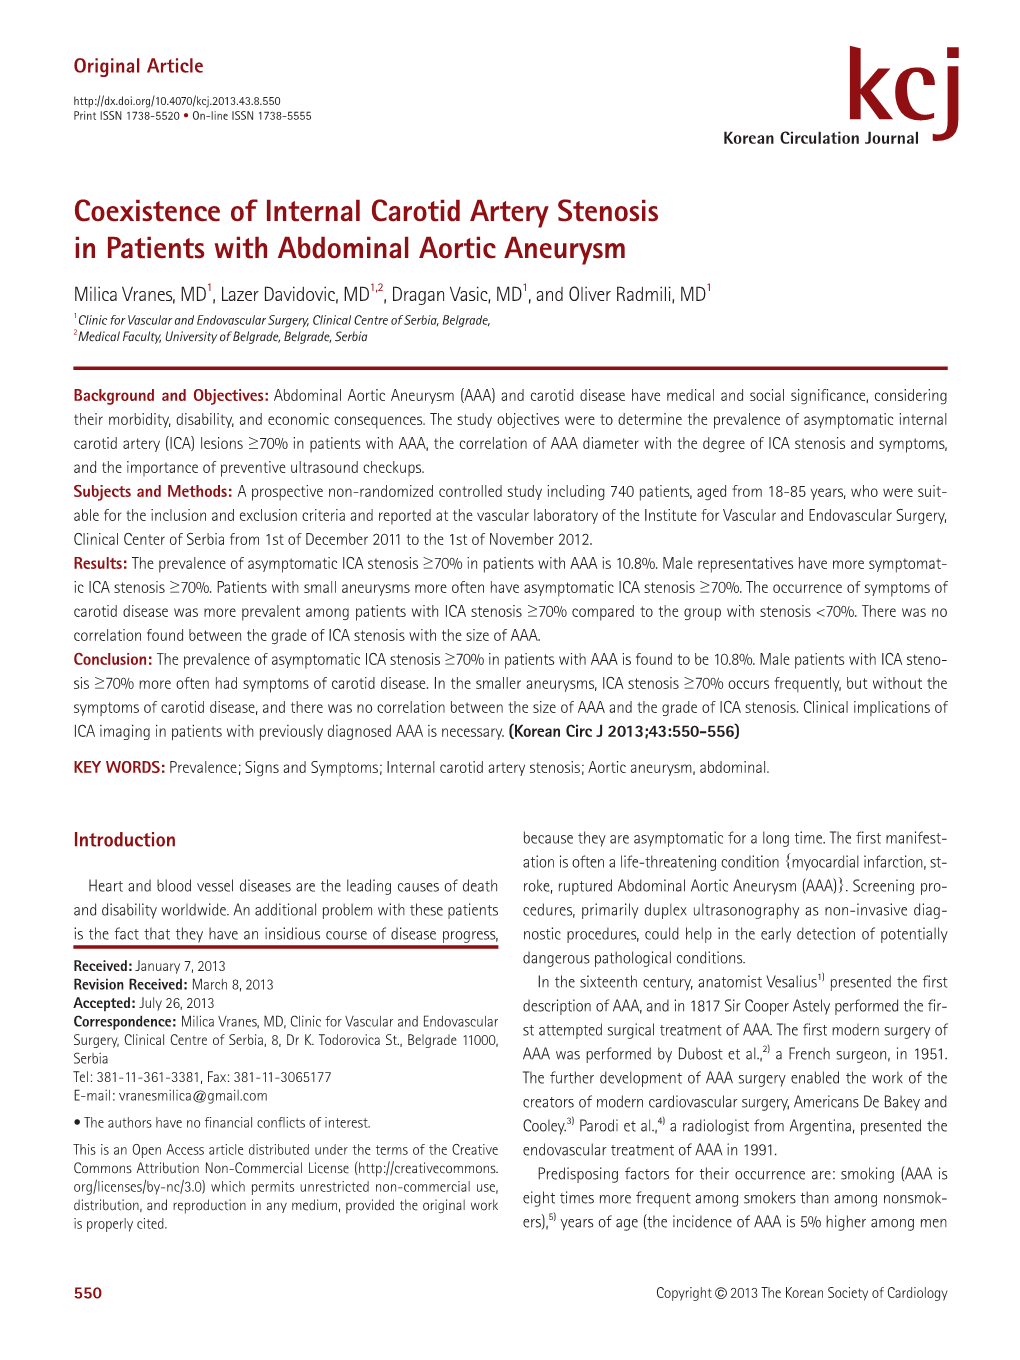 Coexistence of Internal Carotid Artery Stenosis in Patients with Abdominal